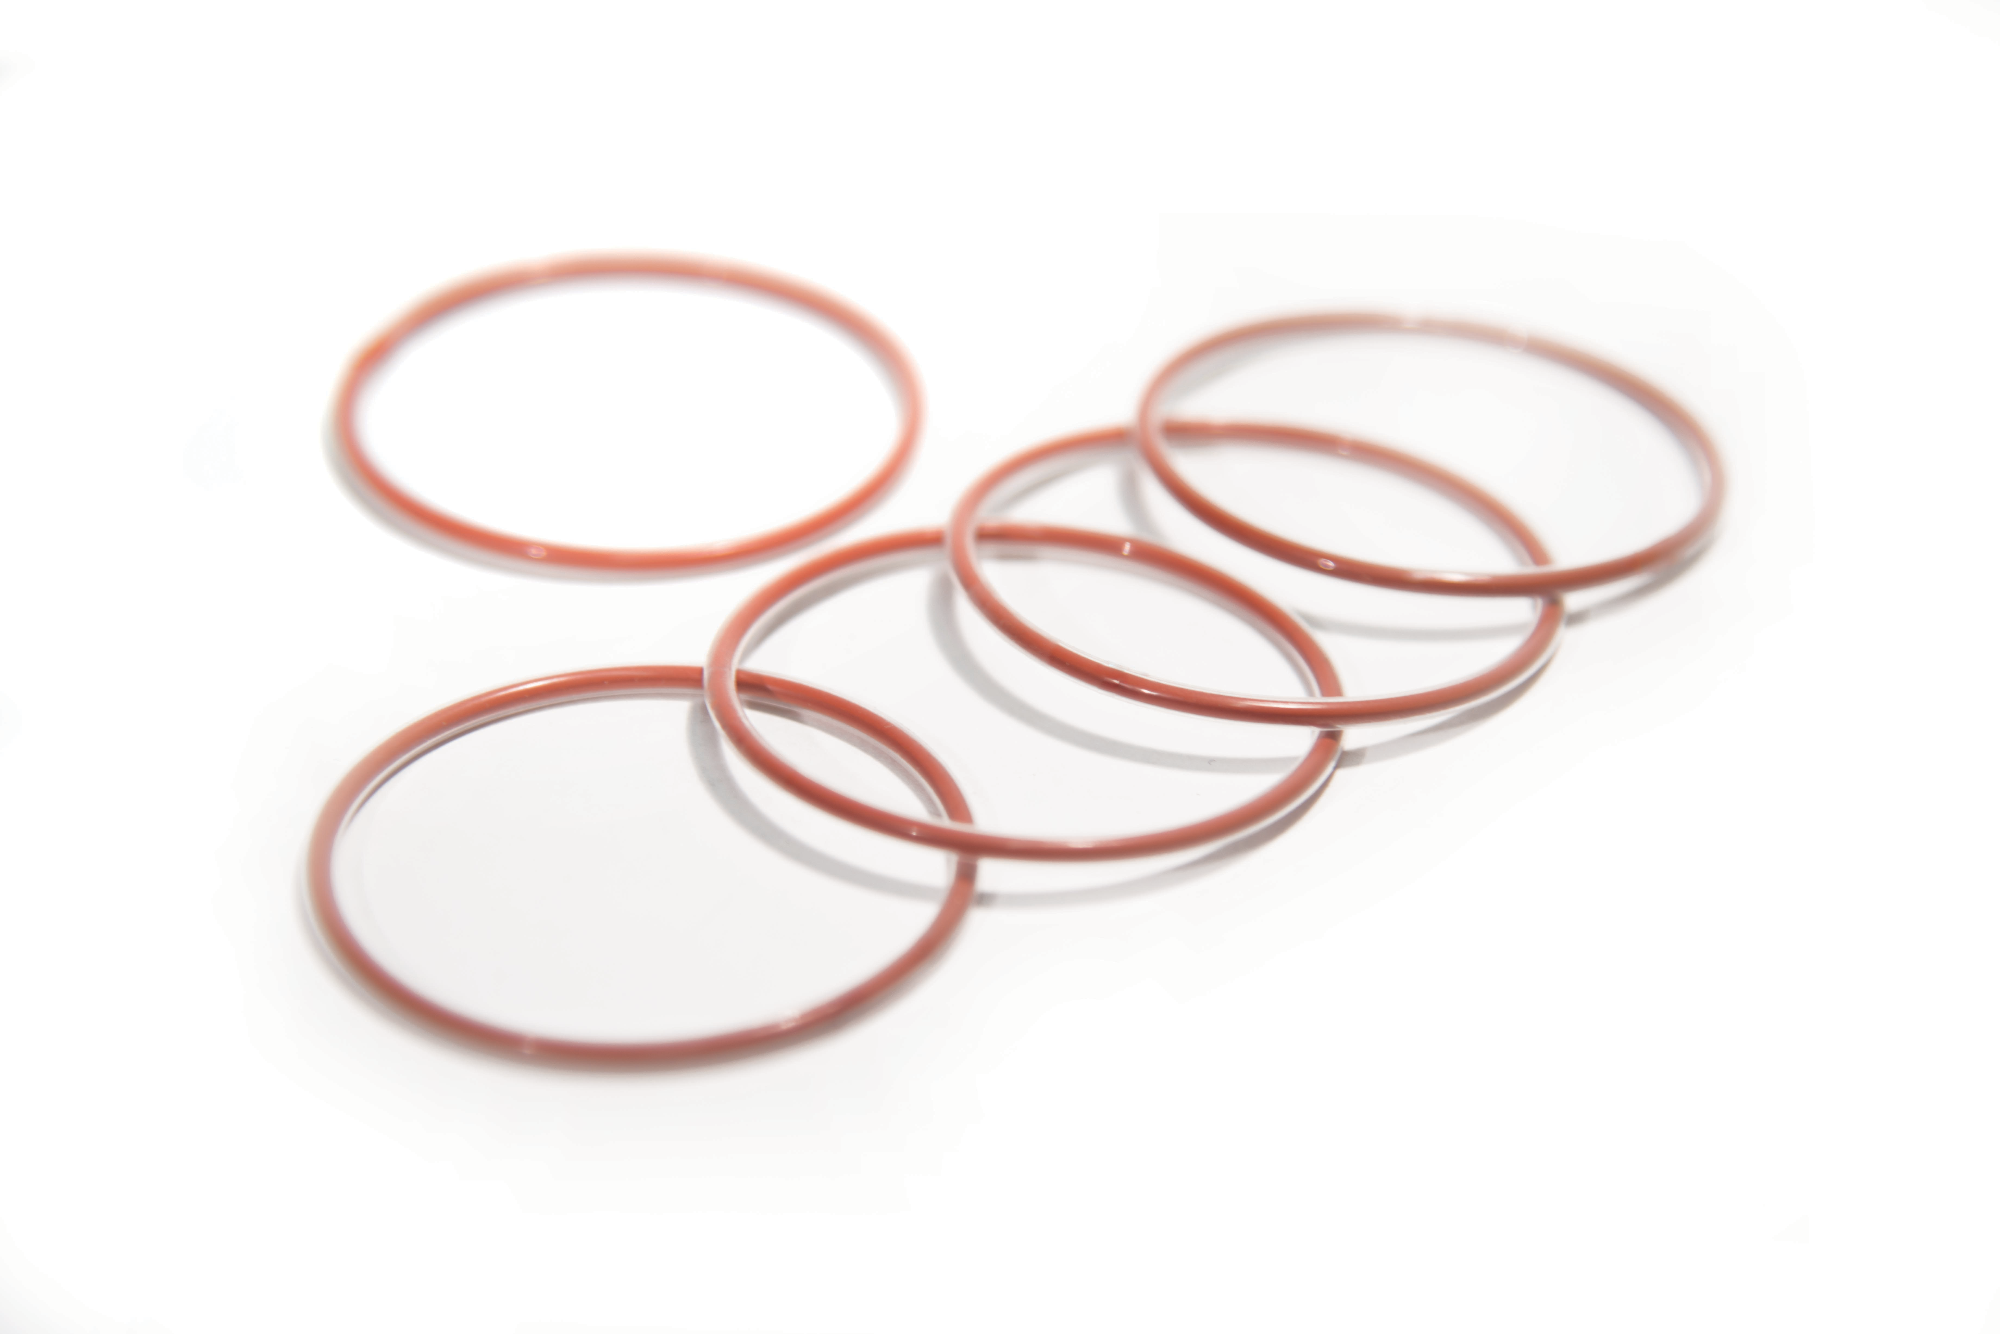 Oil Seals - Oil Seals Suppliers, Manufacturers & Exporters, India